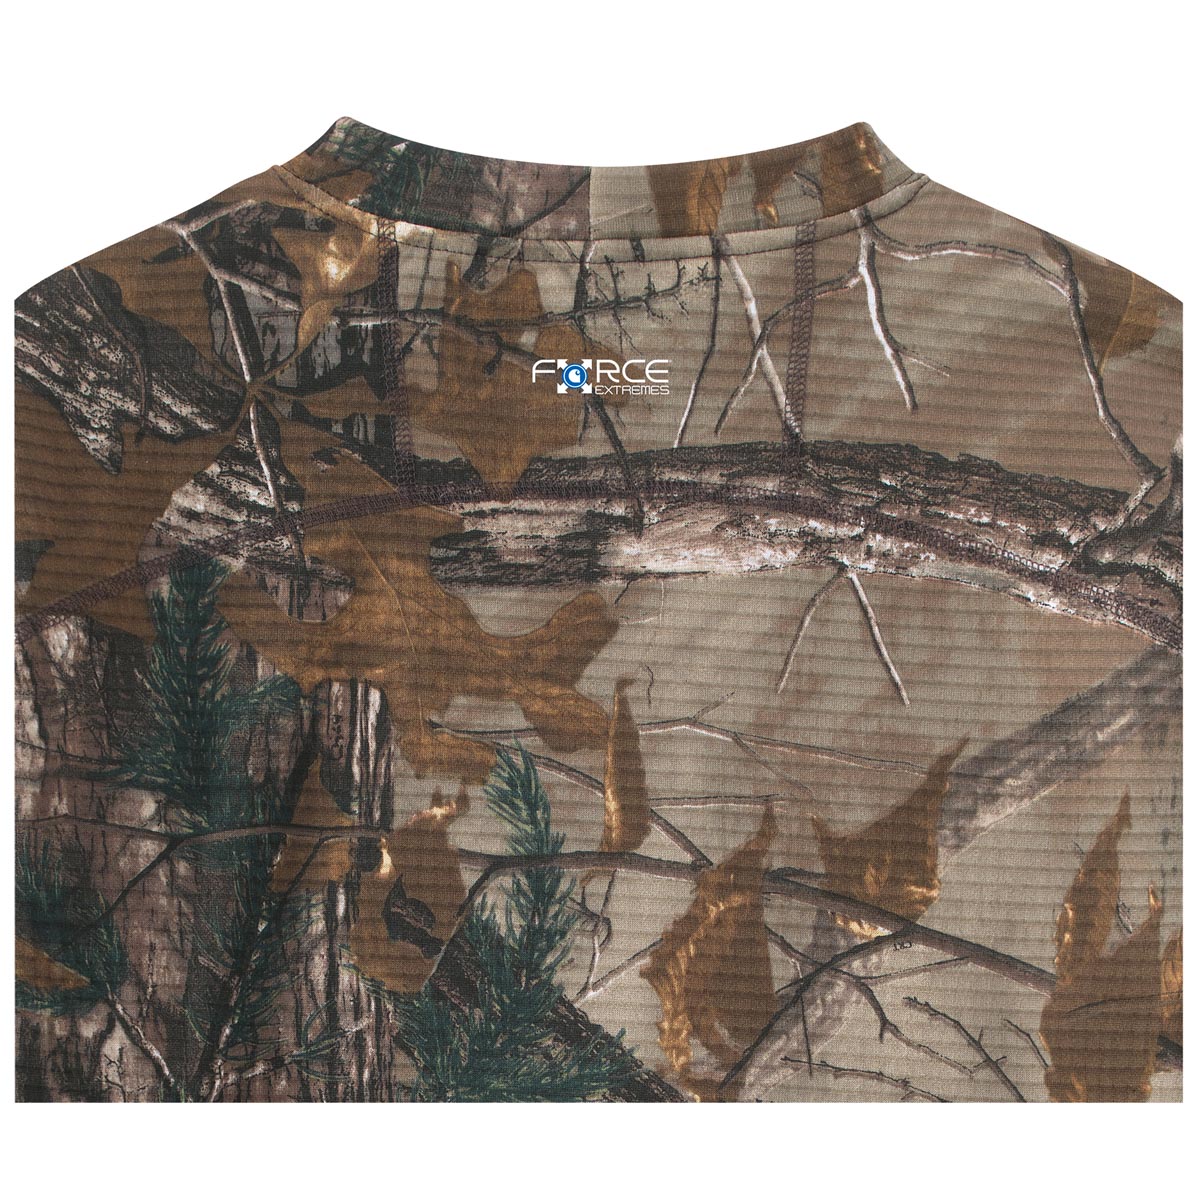 Carhartt Mens Base Force Extremes Cold Weather Camo Crewneck